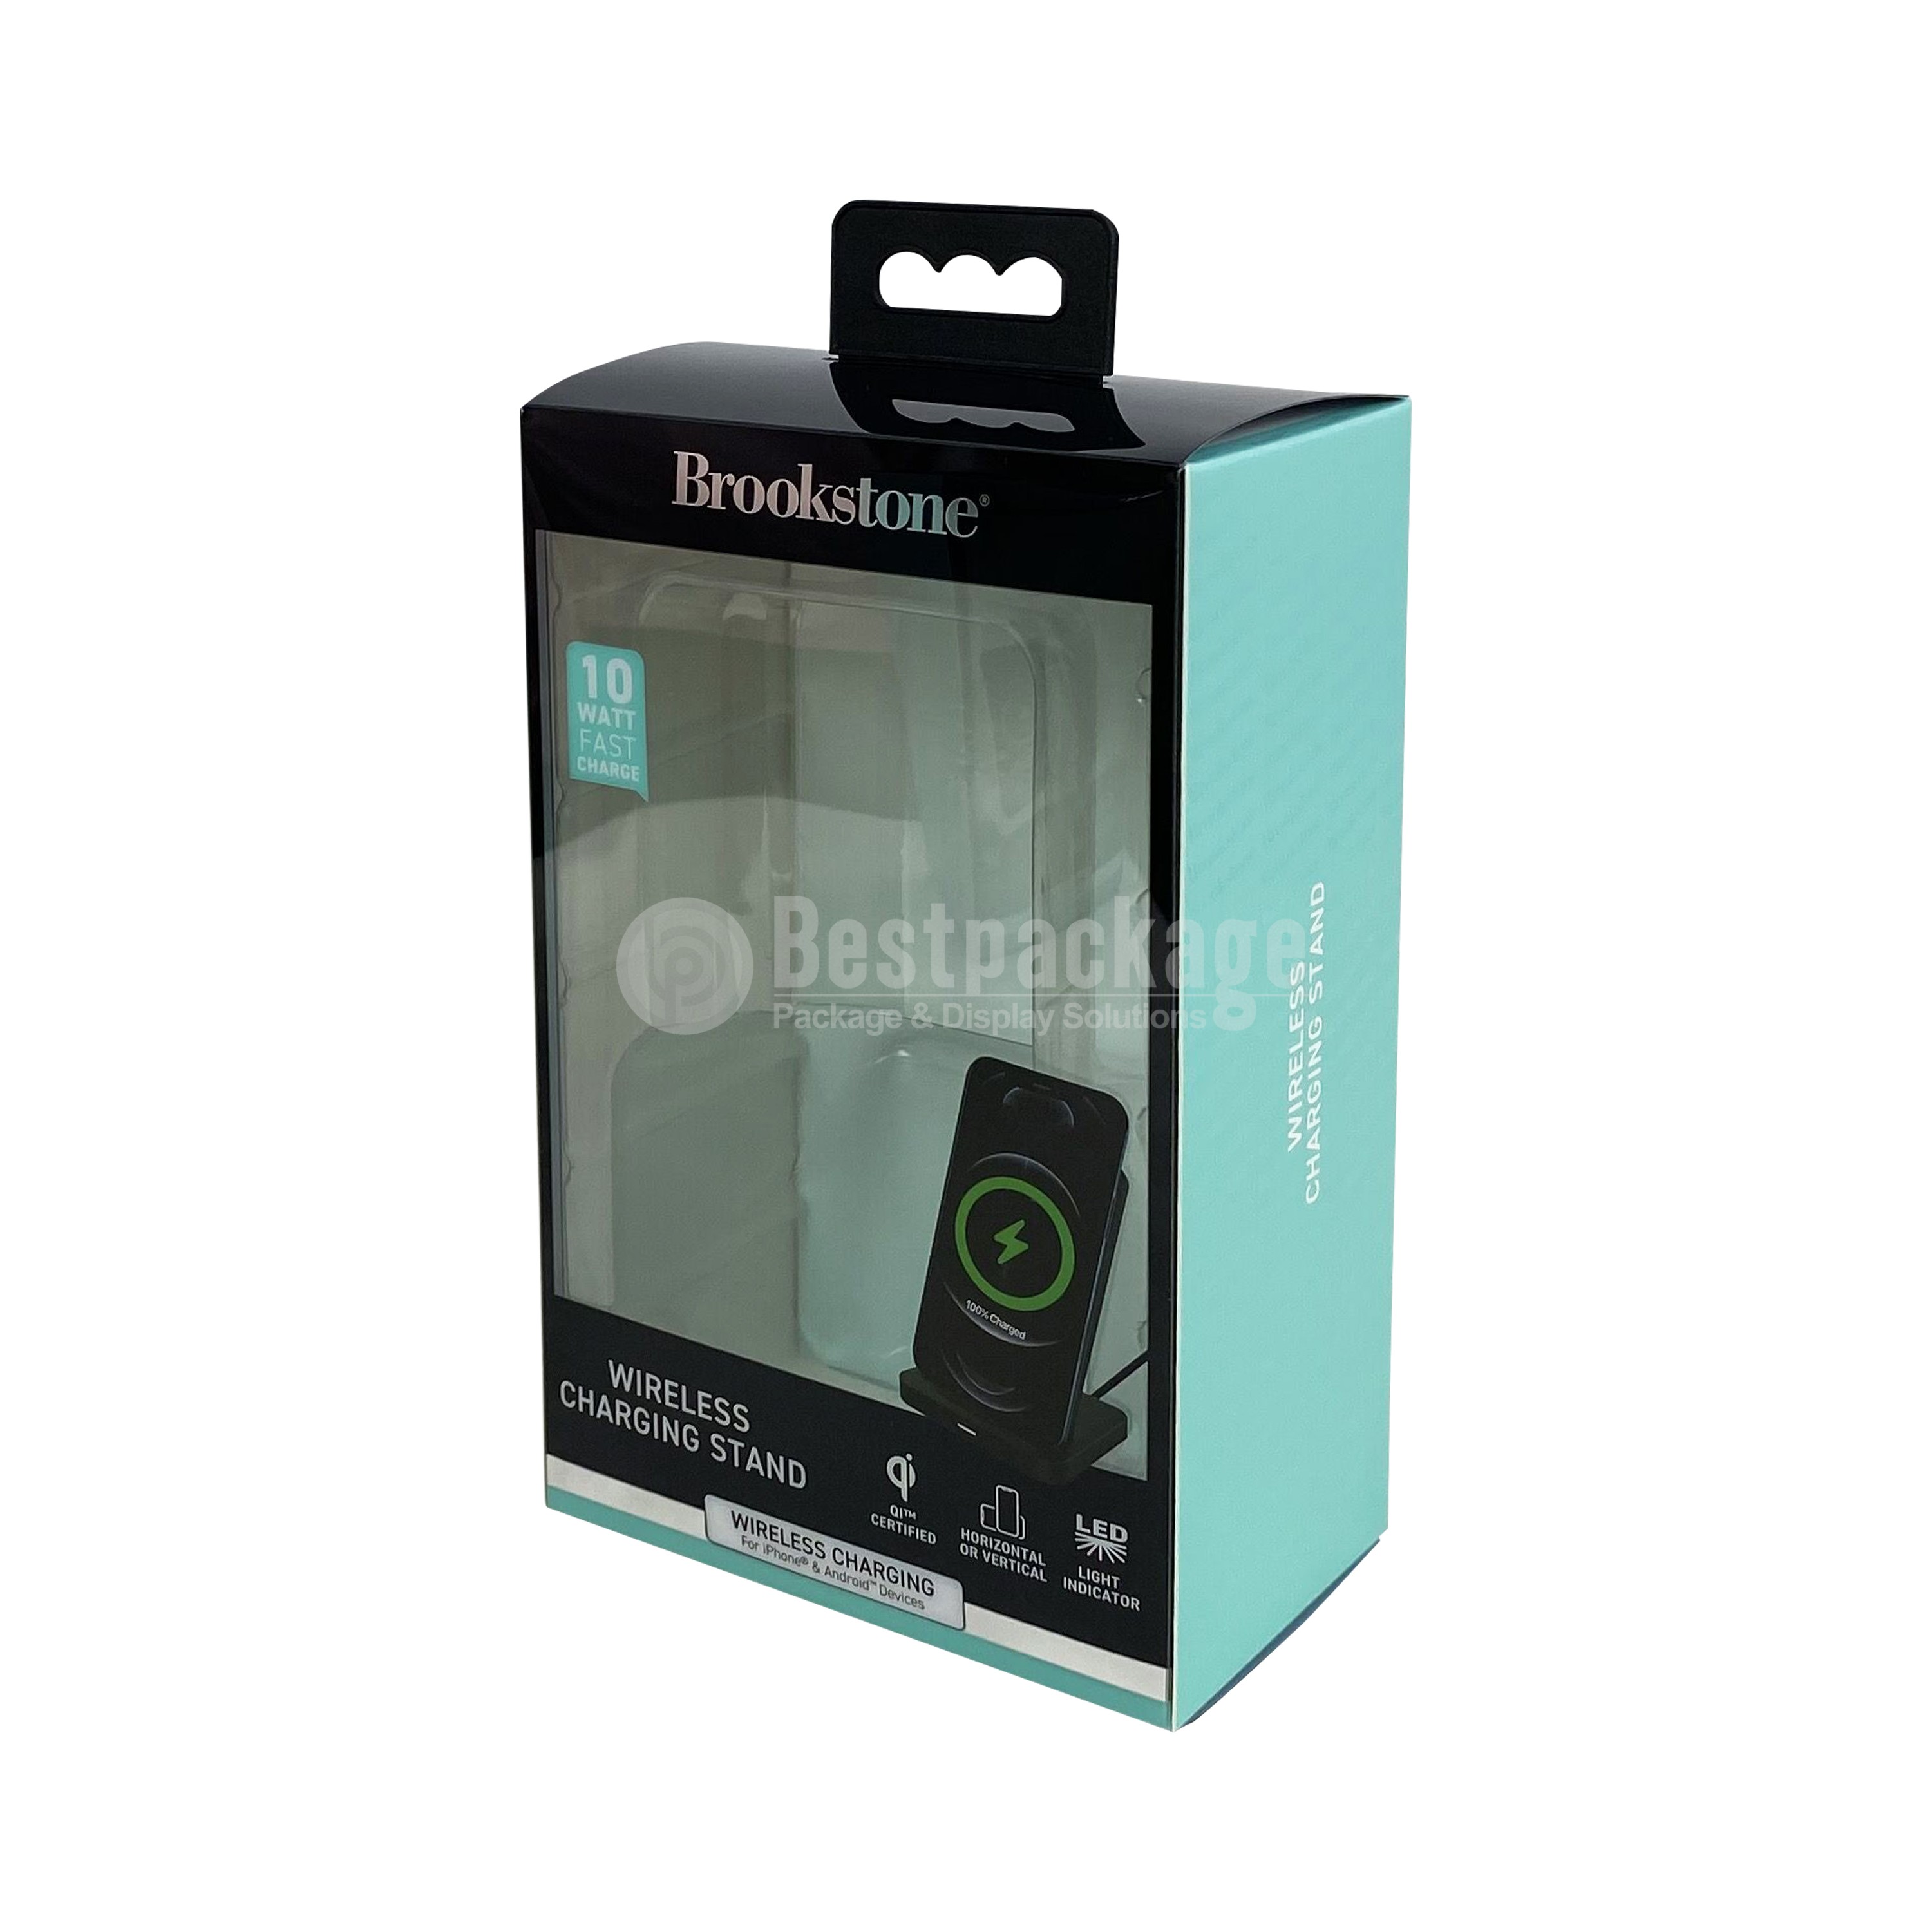 RT01006 Card Stock Paper box, Wireless Charger Package, Electronic Package,